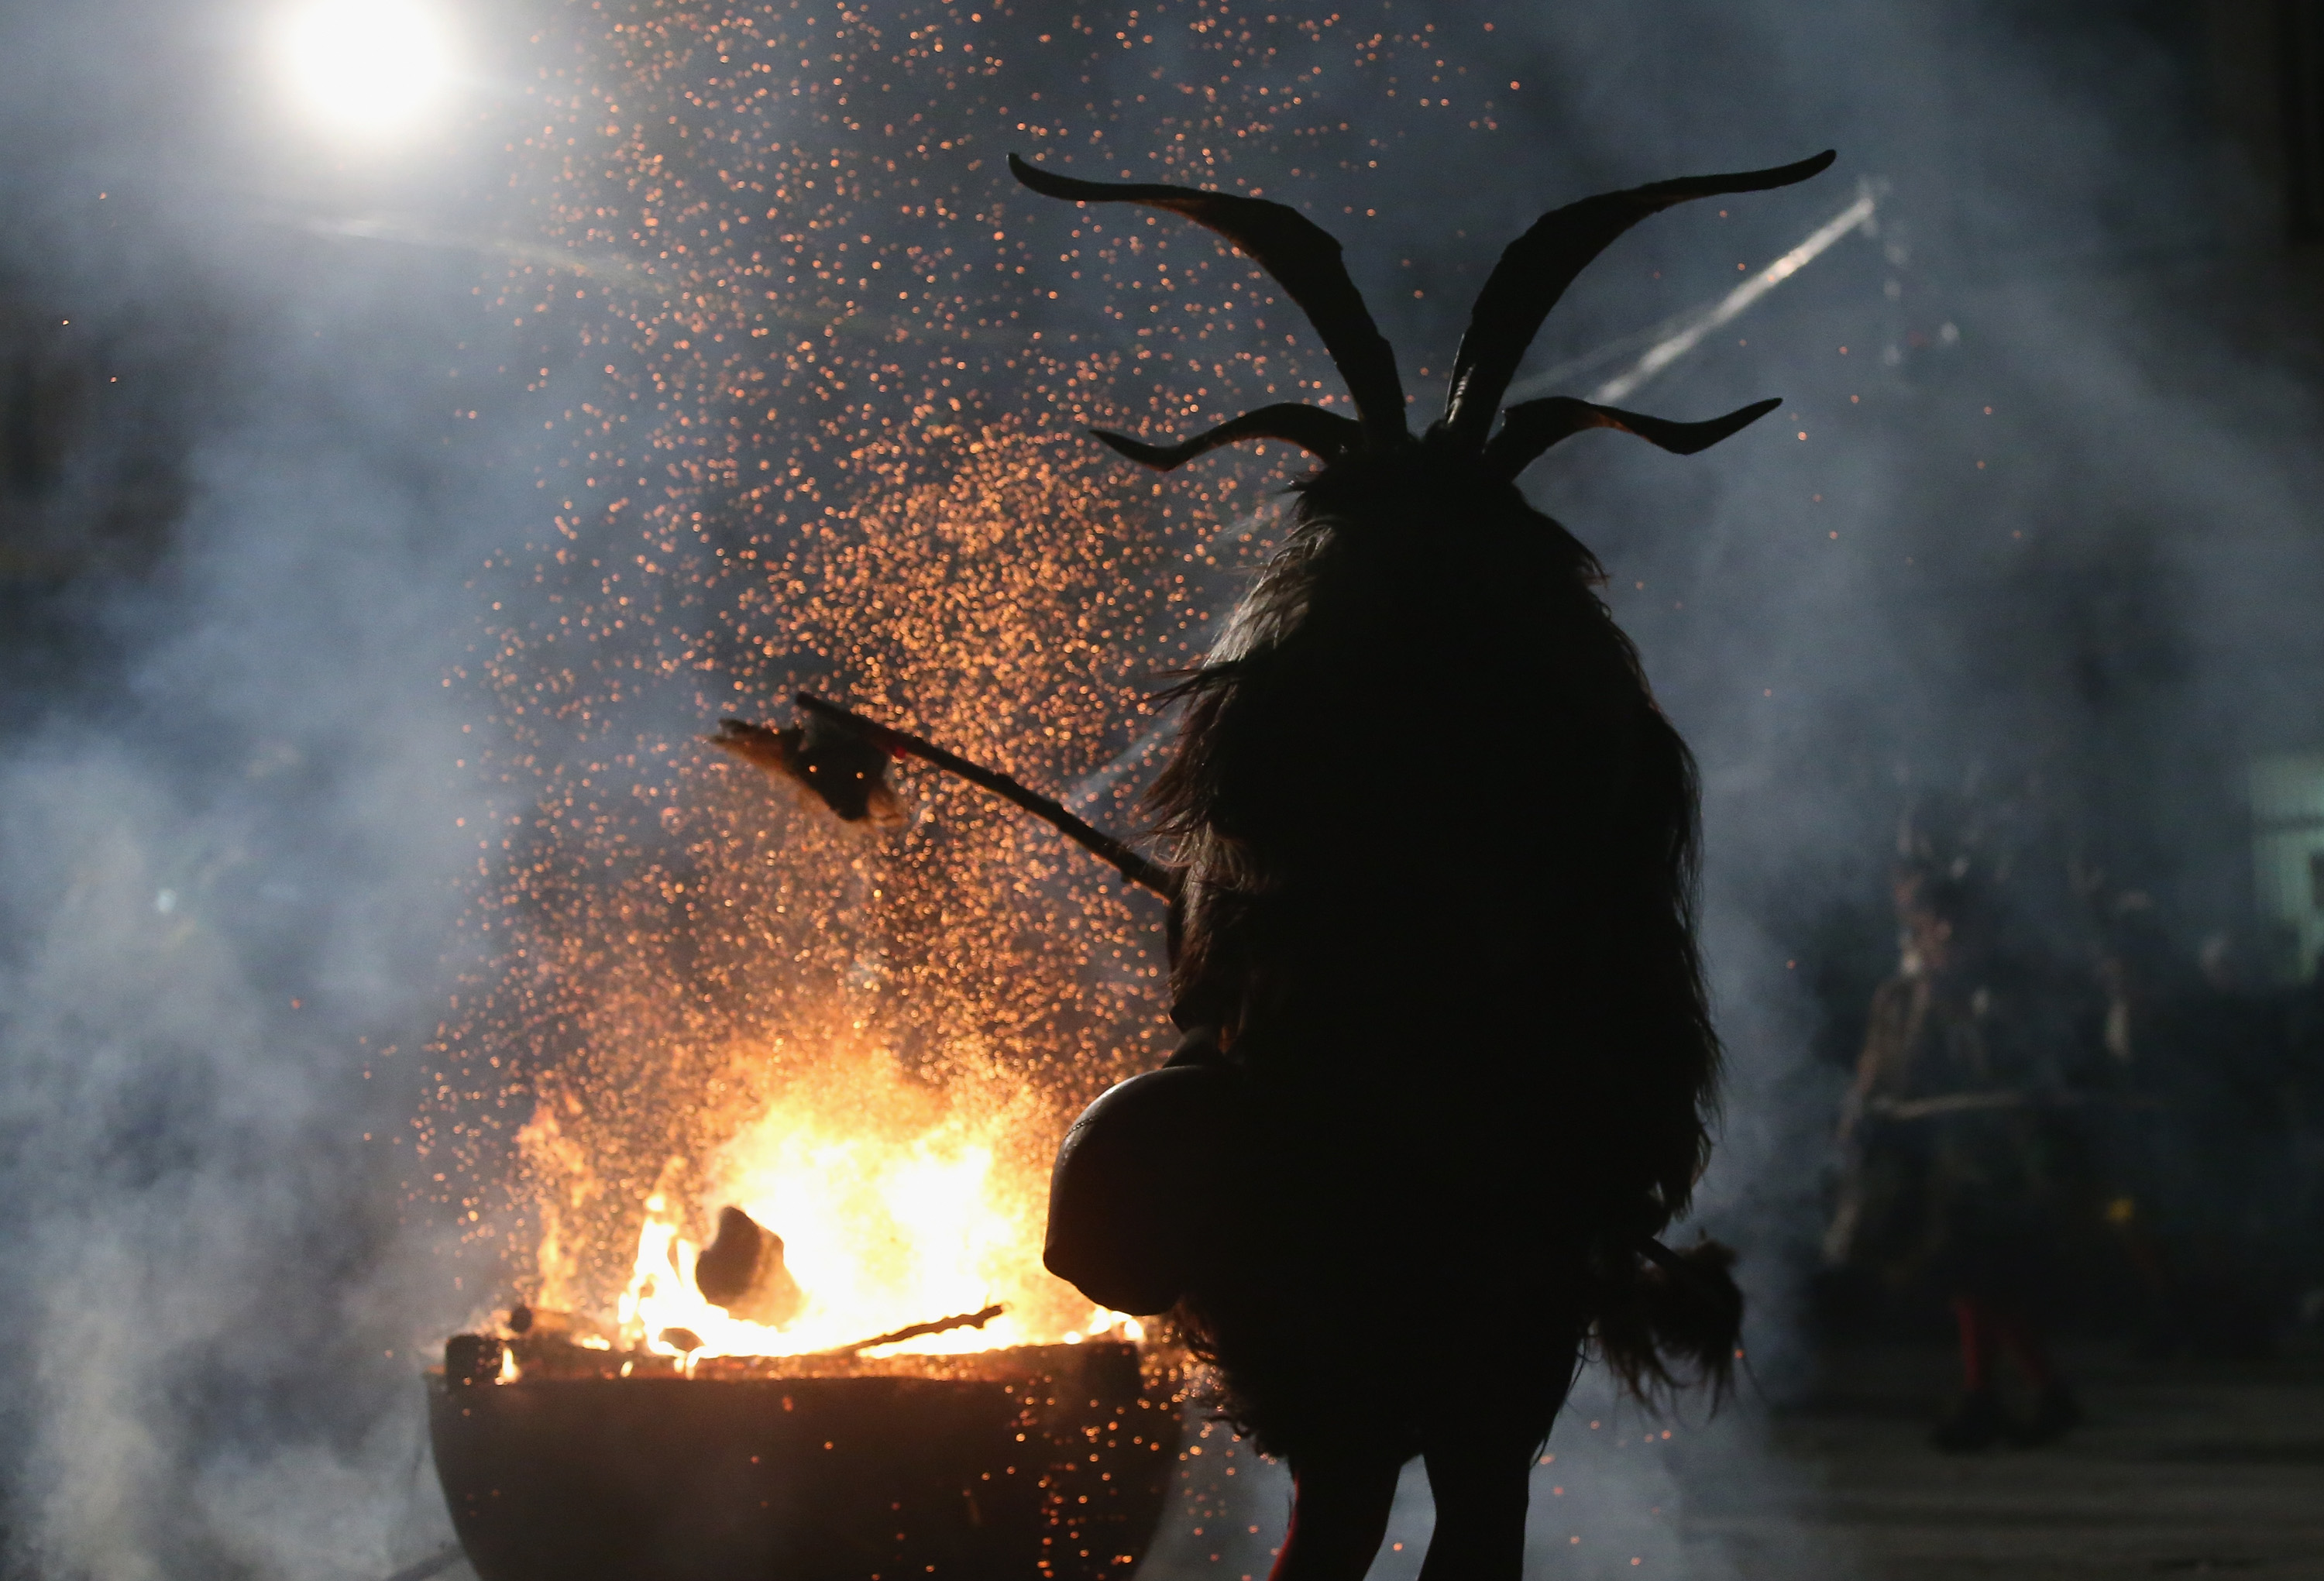 A member of the Haiminger Krampusgruppe dressed as the Krampus creature hits a fire to release sparks on the town square during their annual Krampus night in Tyrol on December 1, 2013, in Haiming, Austria.